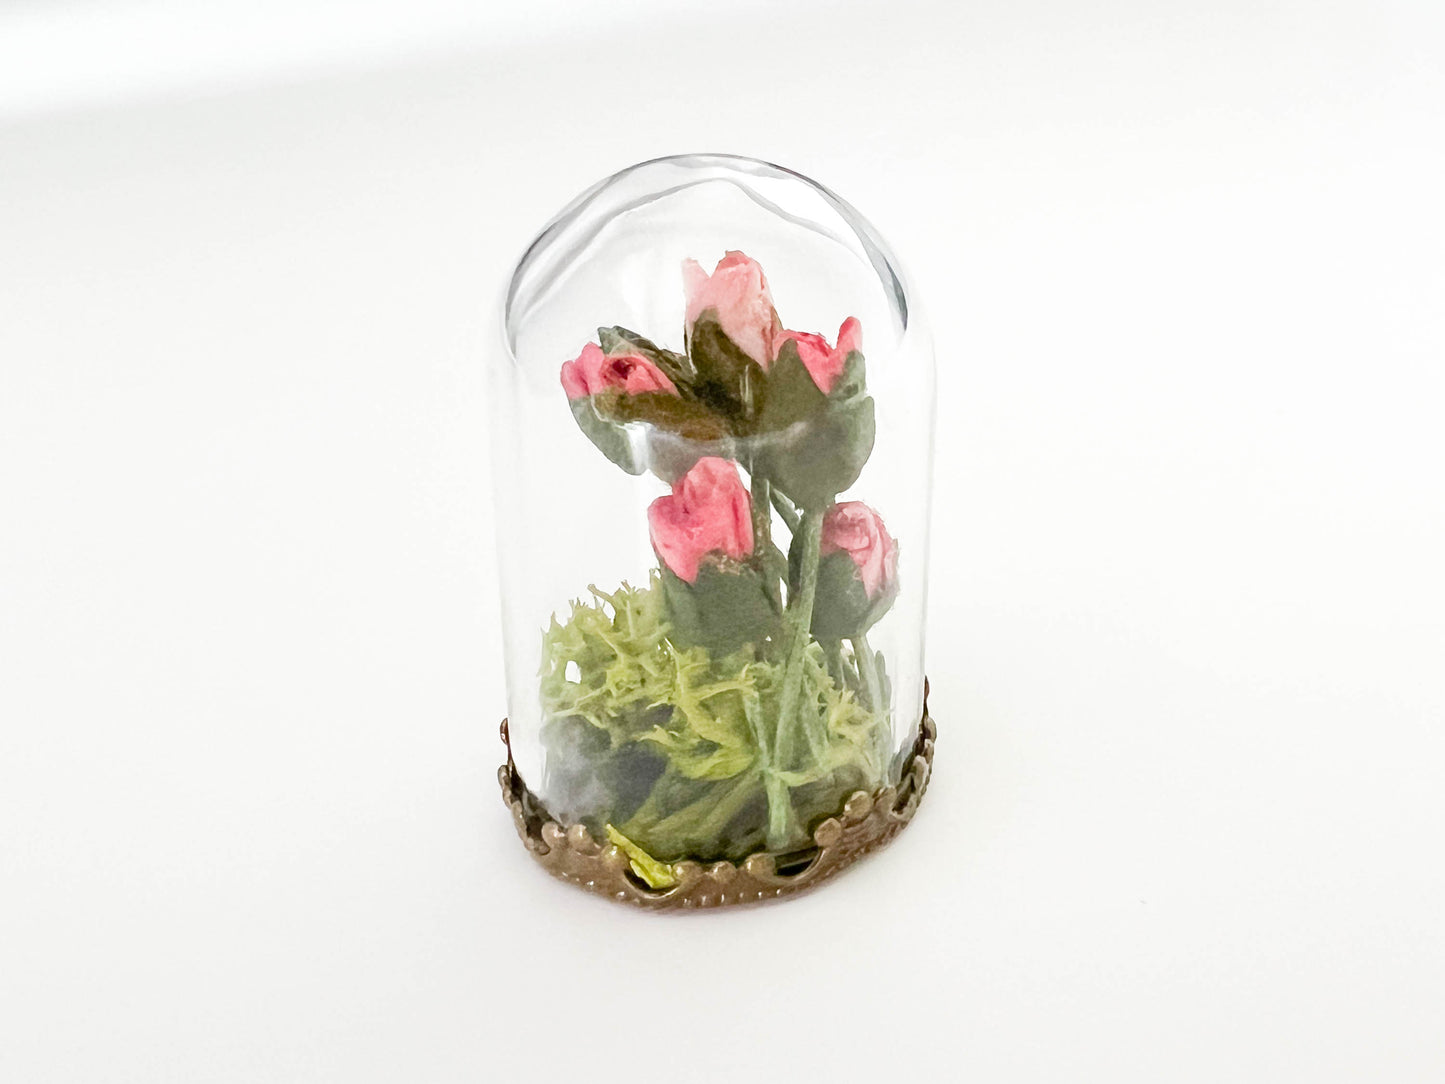 Roses in a glass bell jar cloche decoration